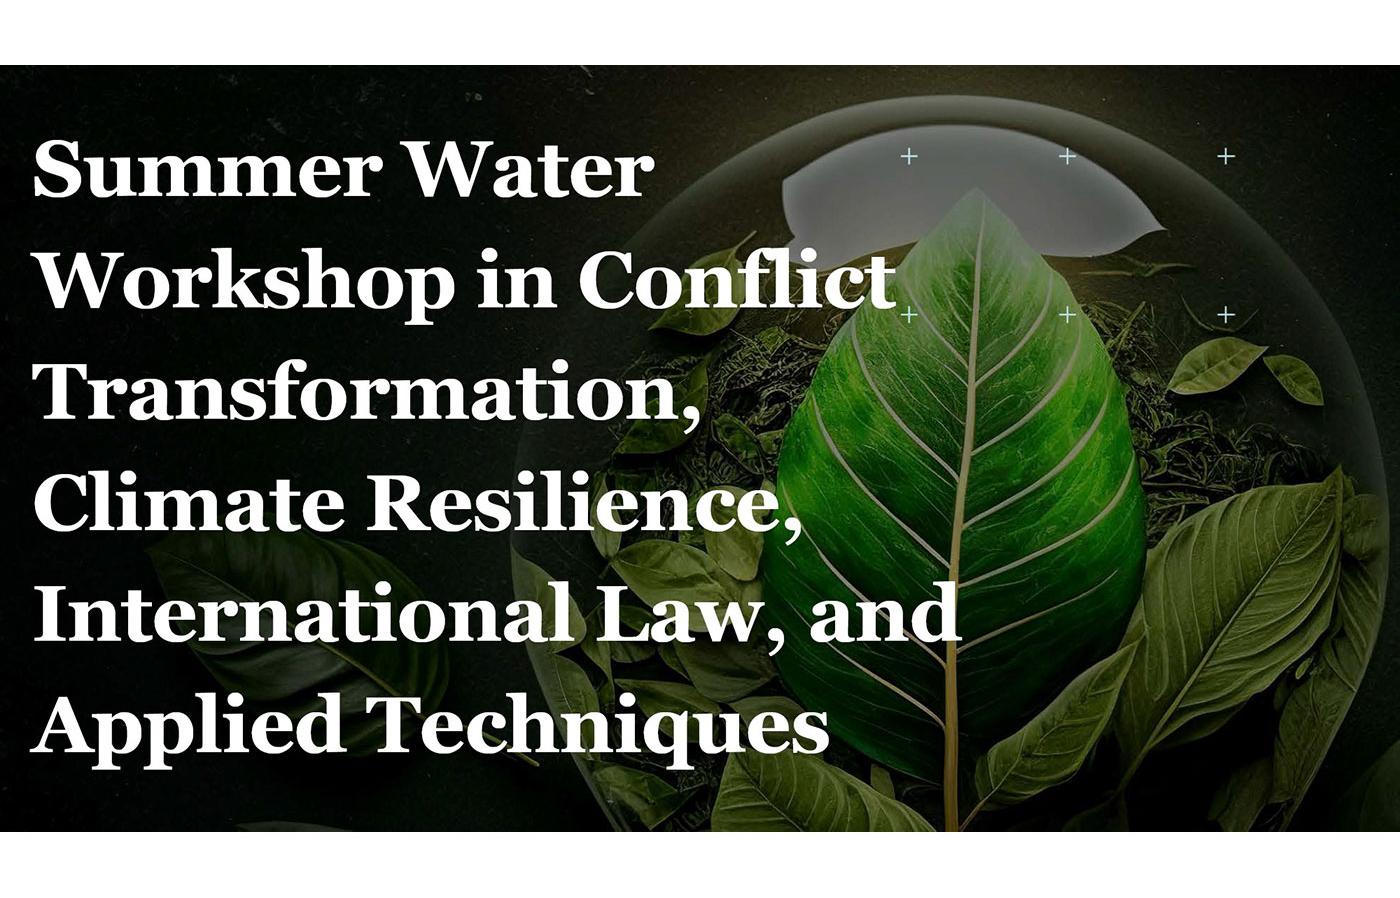 Summer water workshop in conflict transformation, climate resliience, international law, and applied techniques